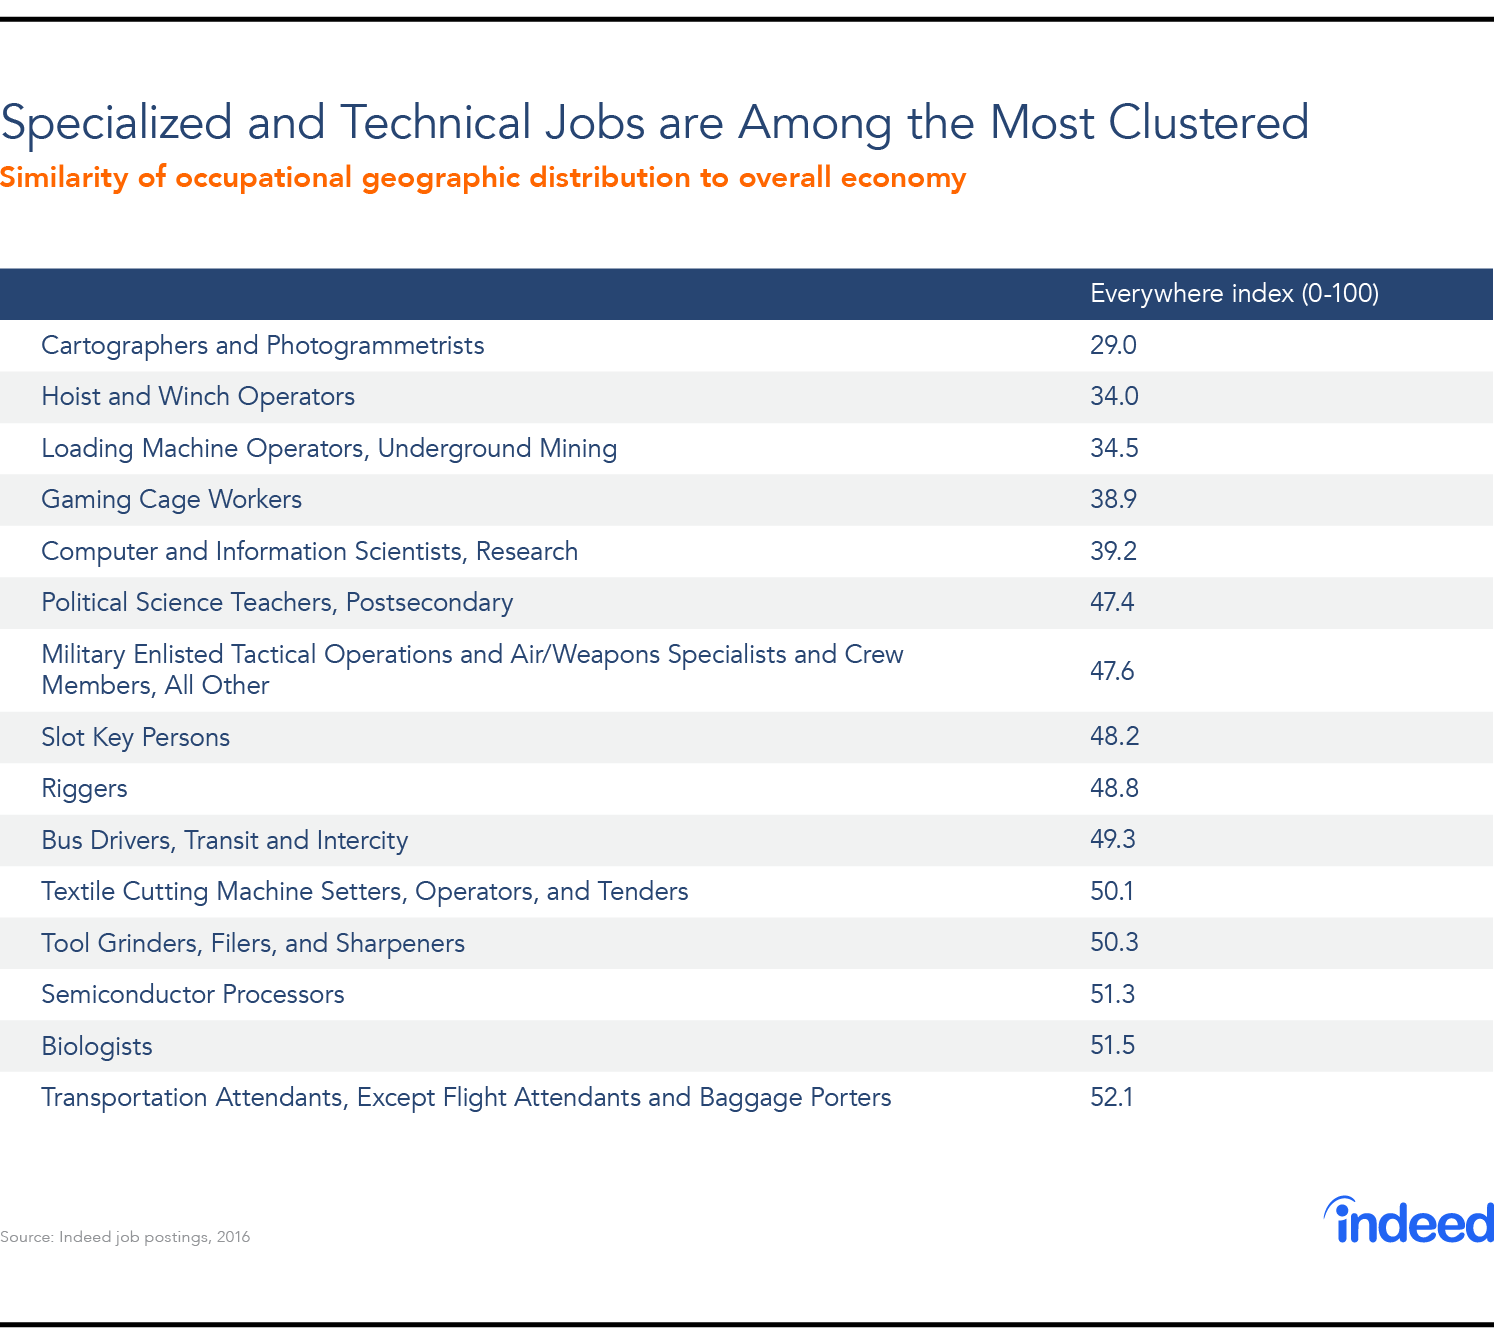 Specialized and technical jobs are among the most clustered